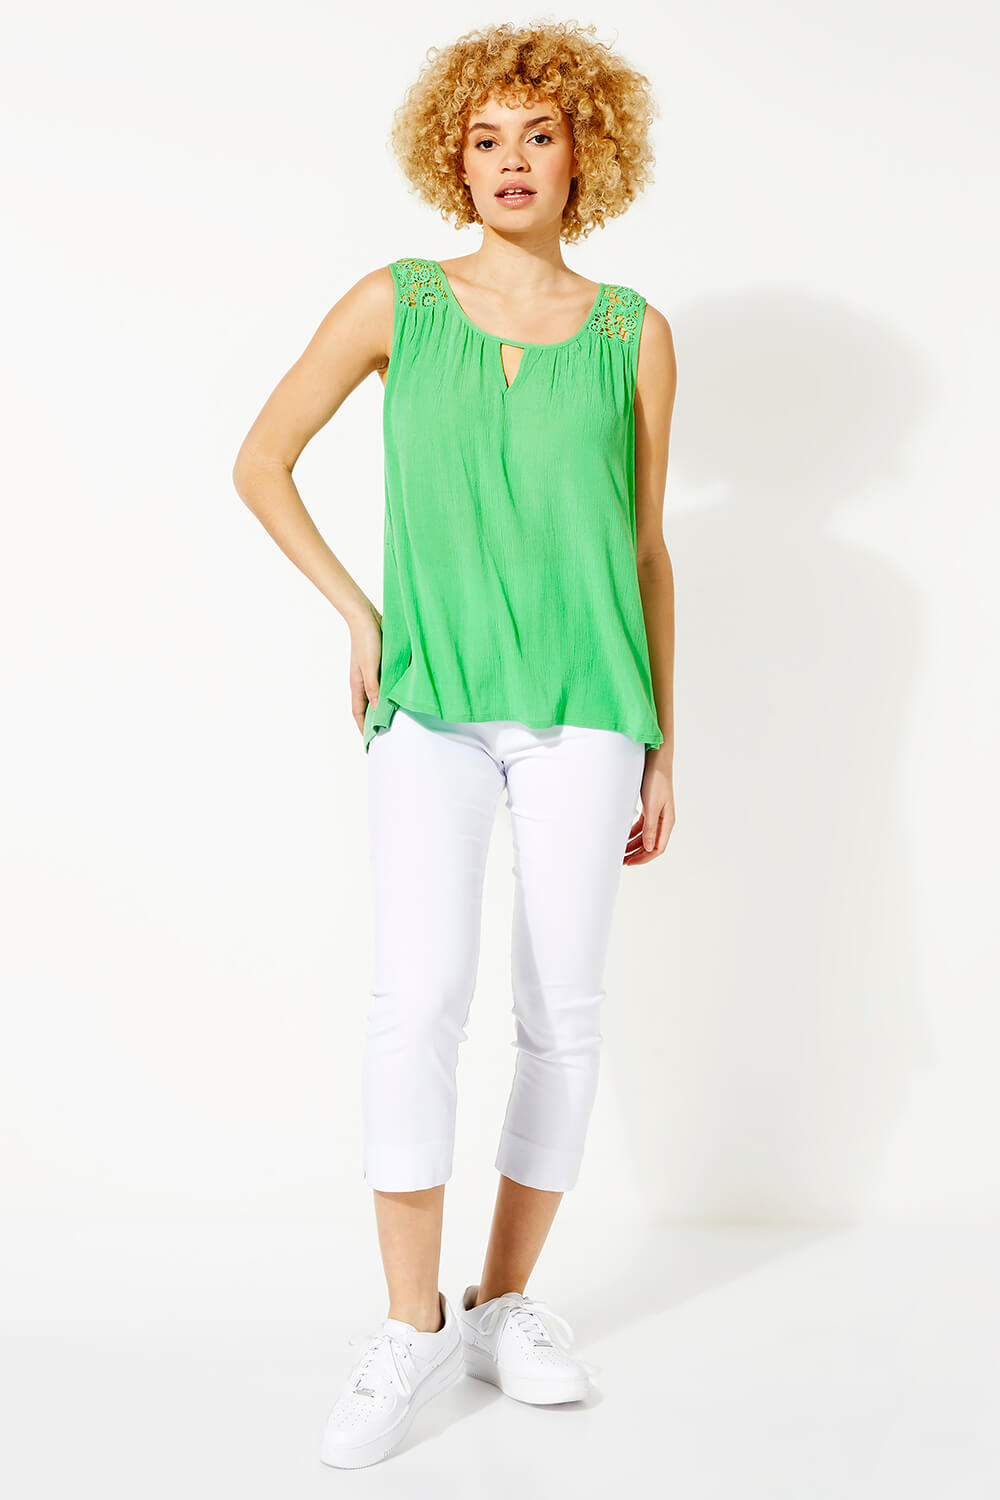 Lace Back Keyhole Detail Top in Green - Roman Originals UK